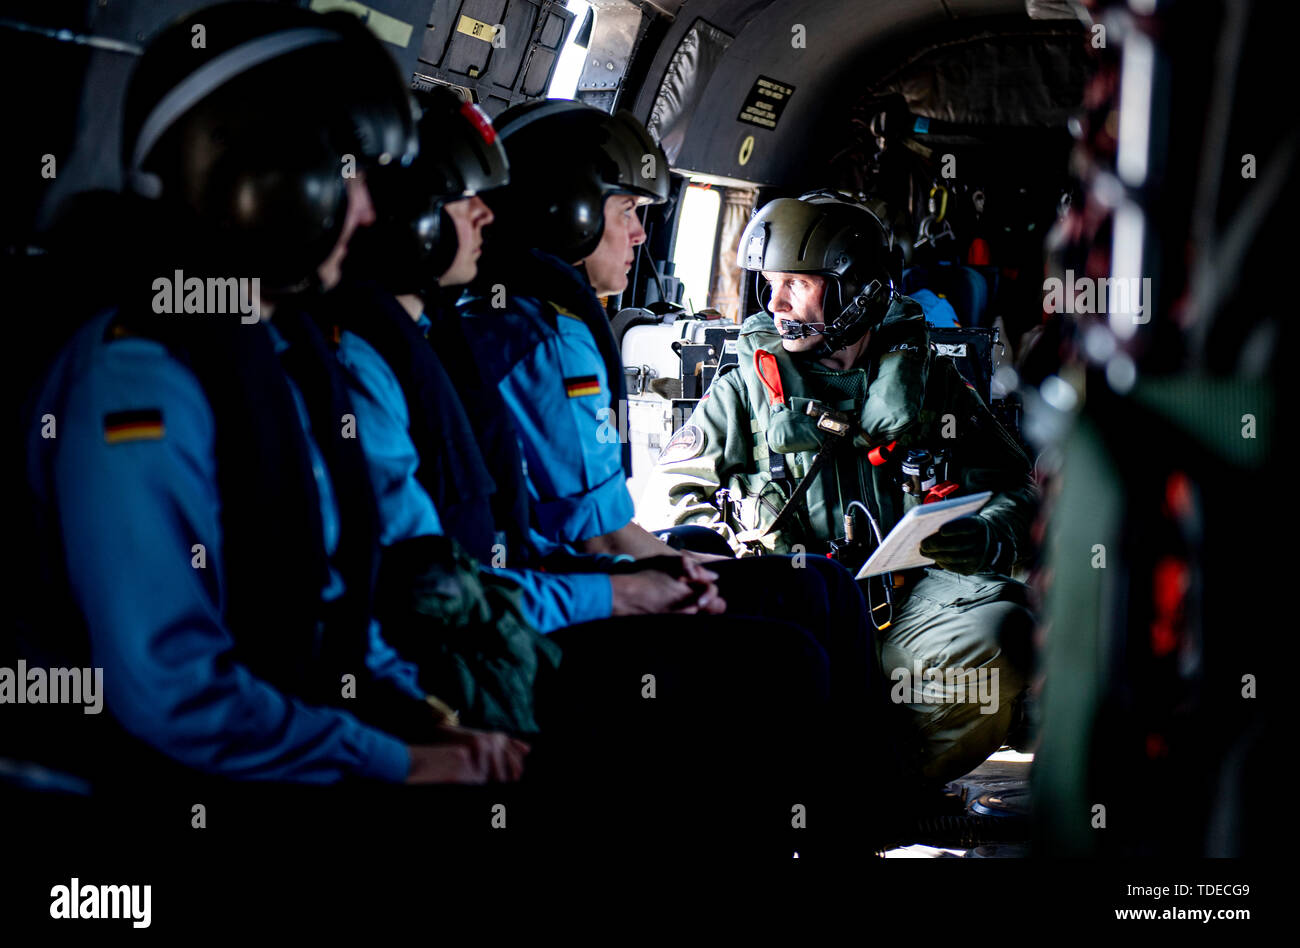 Bornholm, Denmark. 14th June, 2019. Marine soldiers are waiting in a Sea King helicopter for departure from the 'Bonn' task force supplier, which operates near the Danish island of Bornholm. The ship of the German Navy takes part in the Nato manoeuvre 'Baltops' on the Baltic Sea. Credit: Axel Heimken/dpa/Alamy Live News Stock Photo